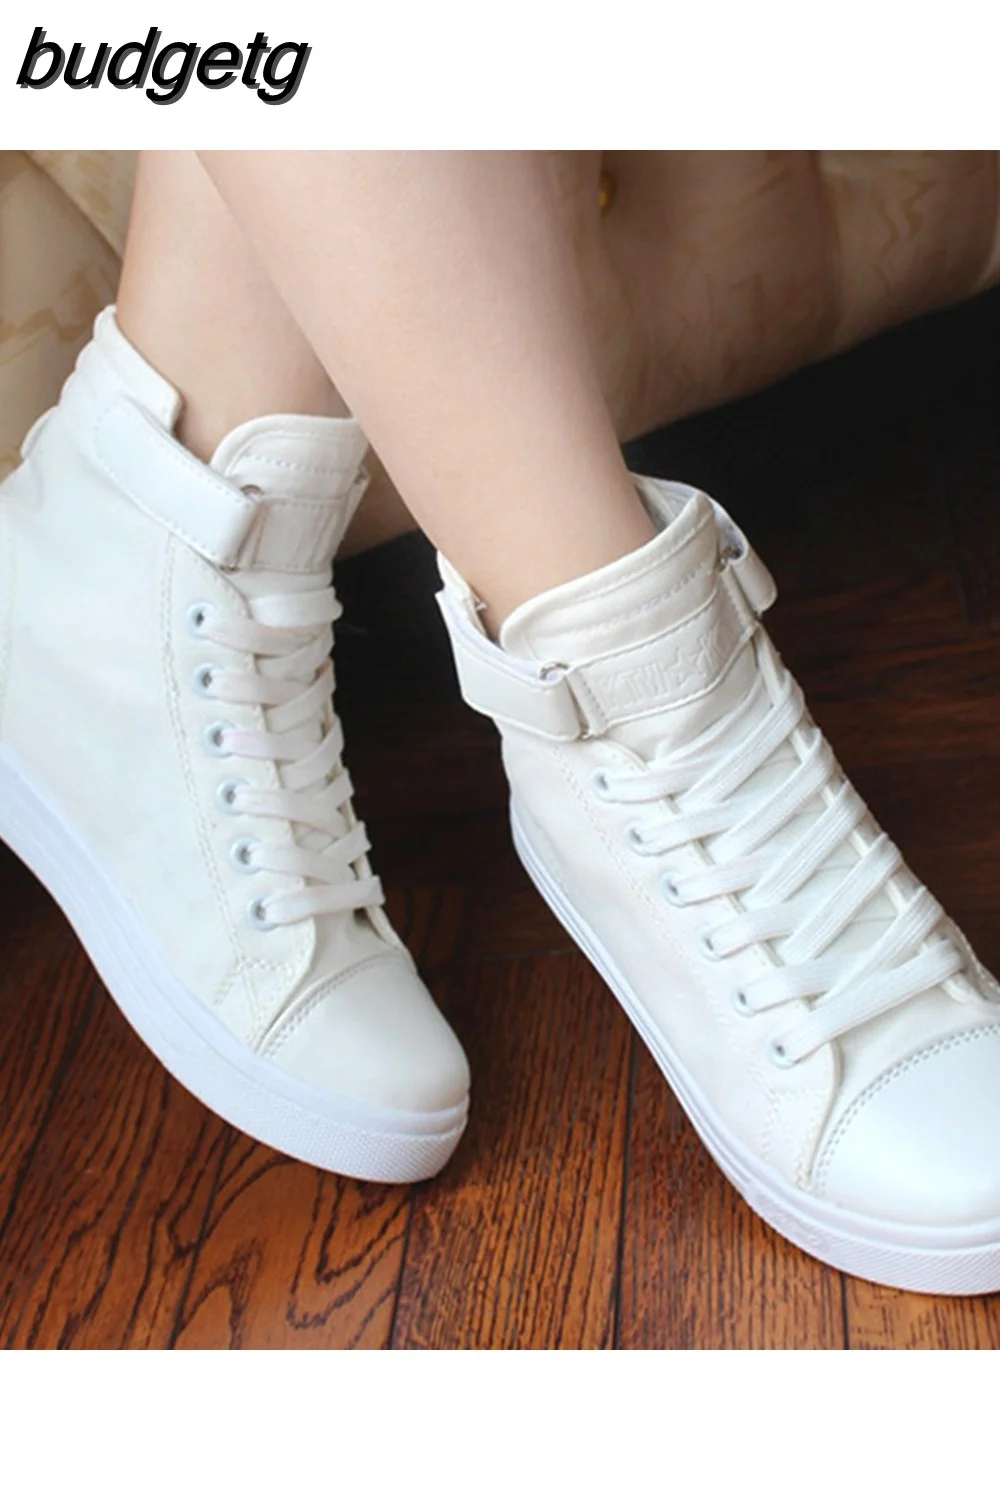 budgetg Shoes White Denim Sneakers Basket Femme Casual Shoes tenis feminino High Top Flat Shoes Trainers Women Zapatos Mujer